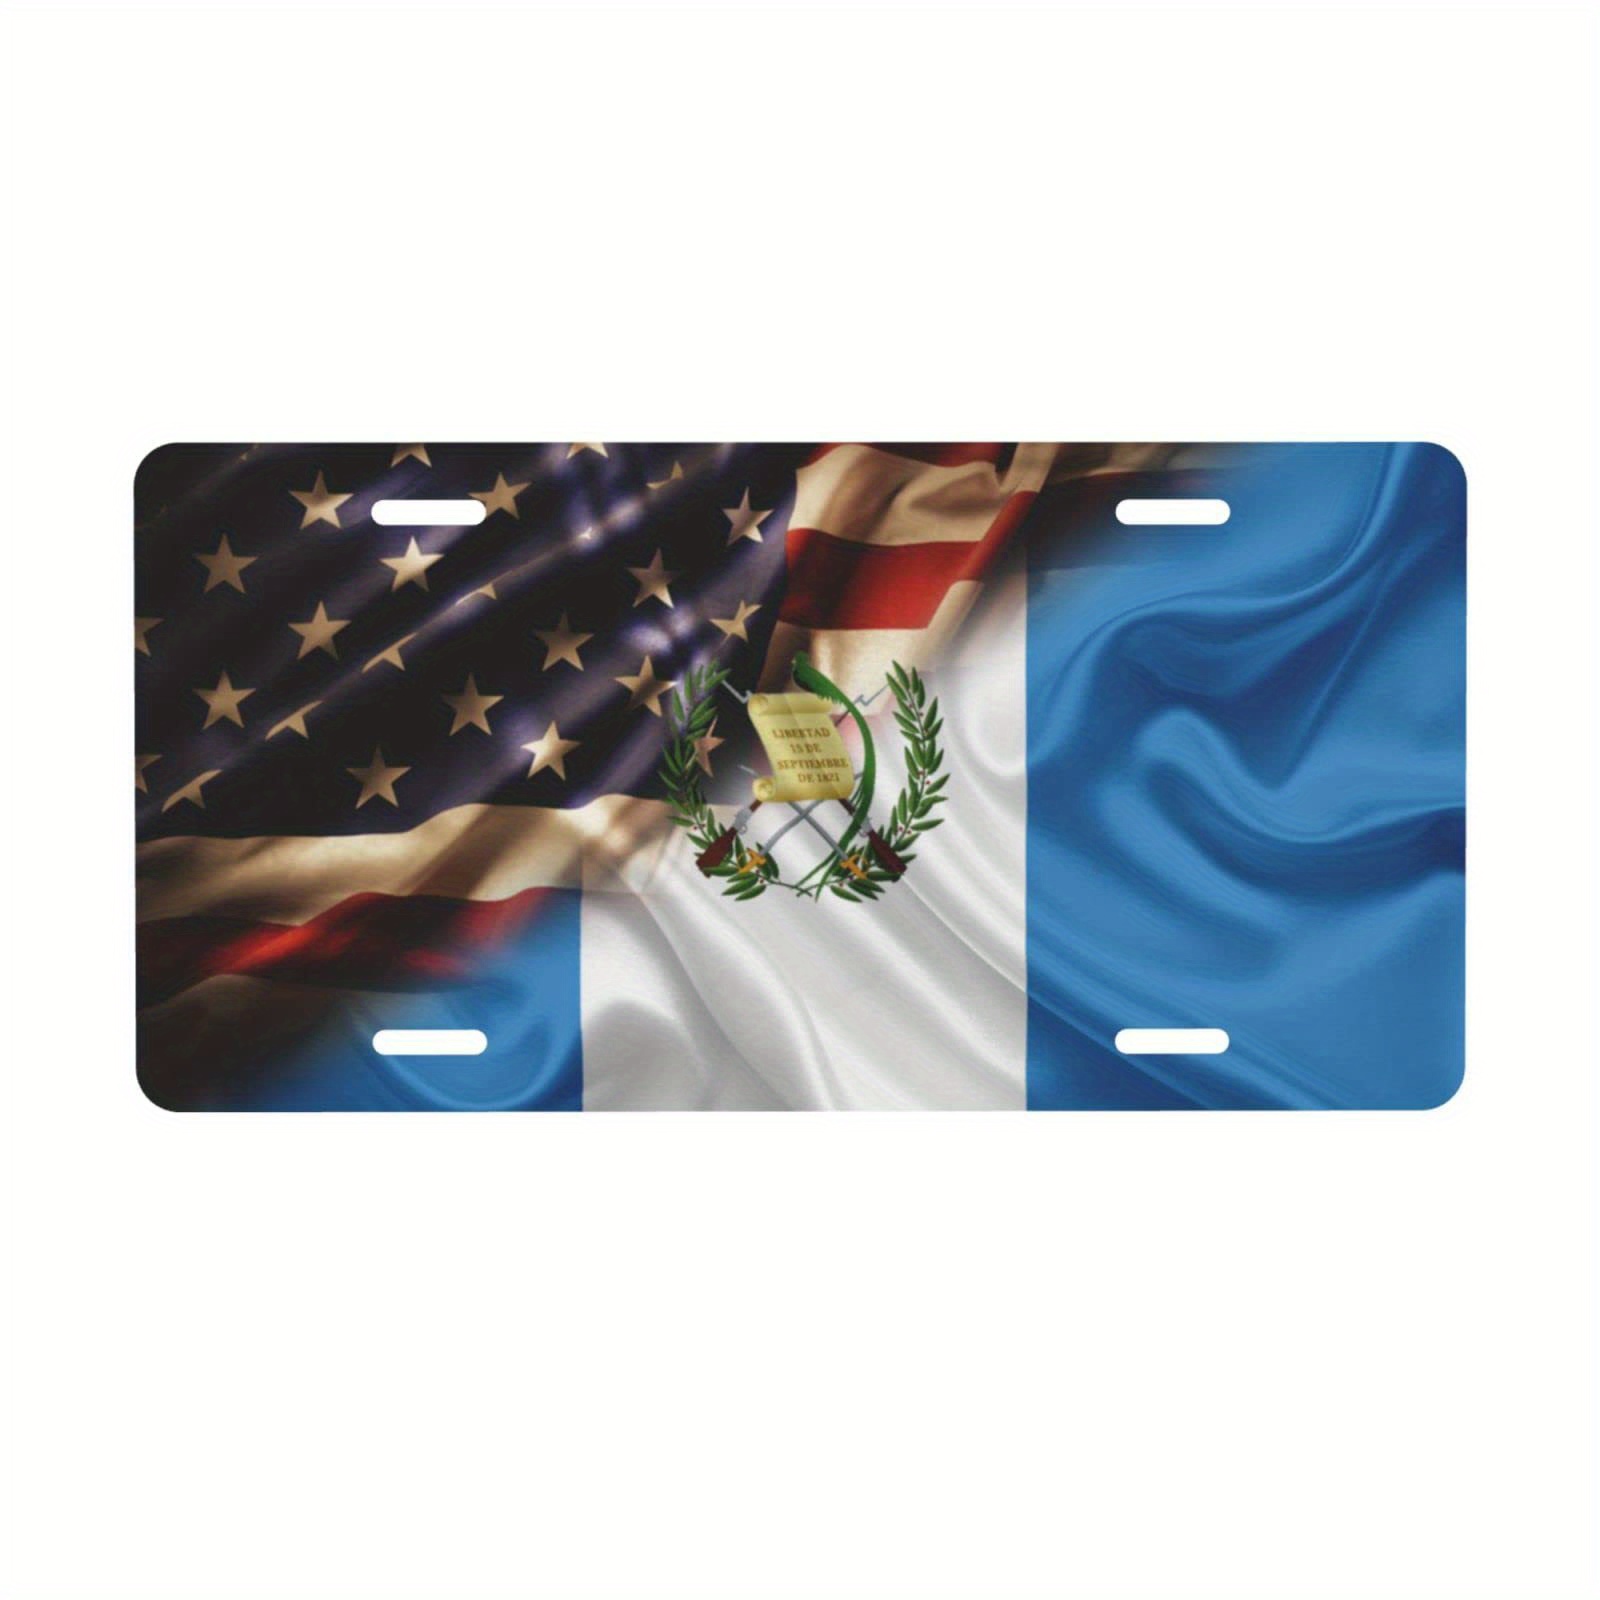 

Guatemala & Usa Flag License Plate Cover - Durable Aluminum Frame For Car, 6"x12", Weatherproof, Uv Resistant